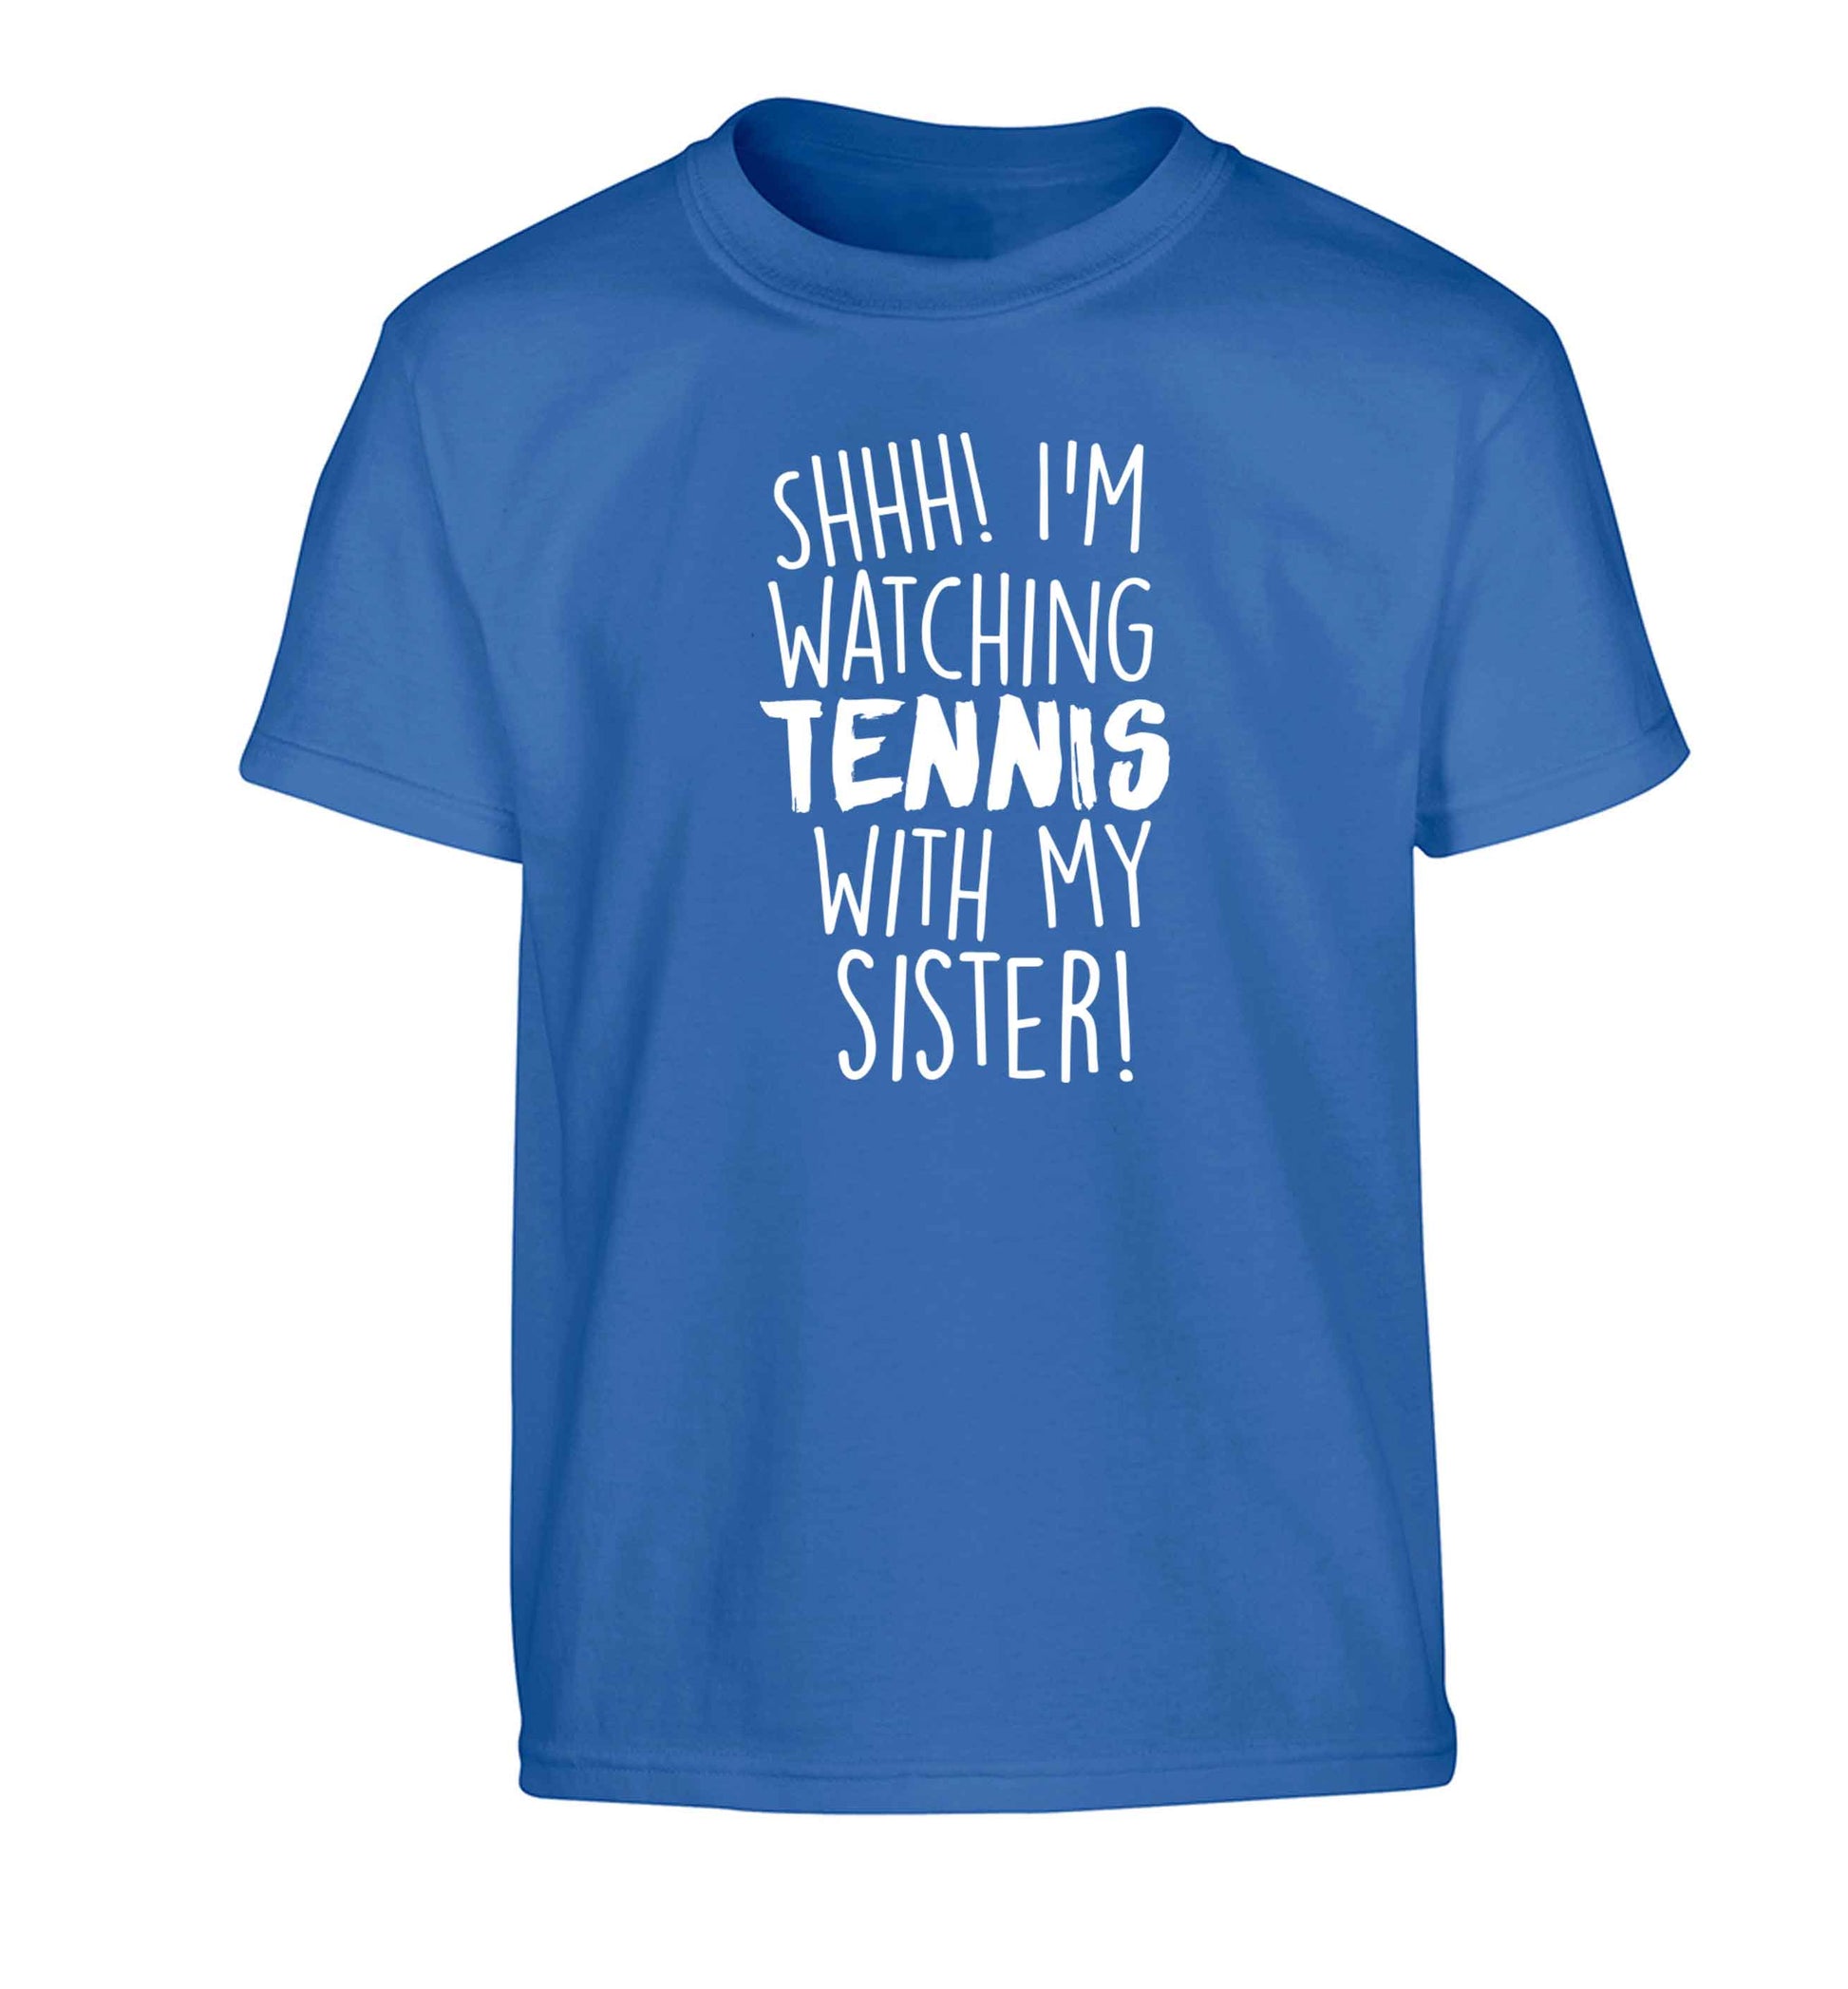 Shh! I'm watching tennis with my sister! Children's blue Tshirt 12-13 Years